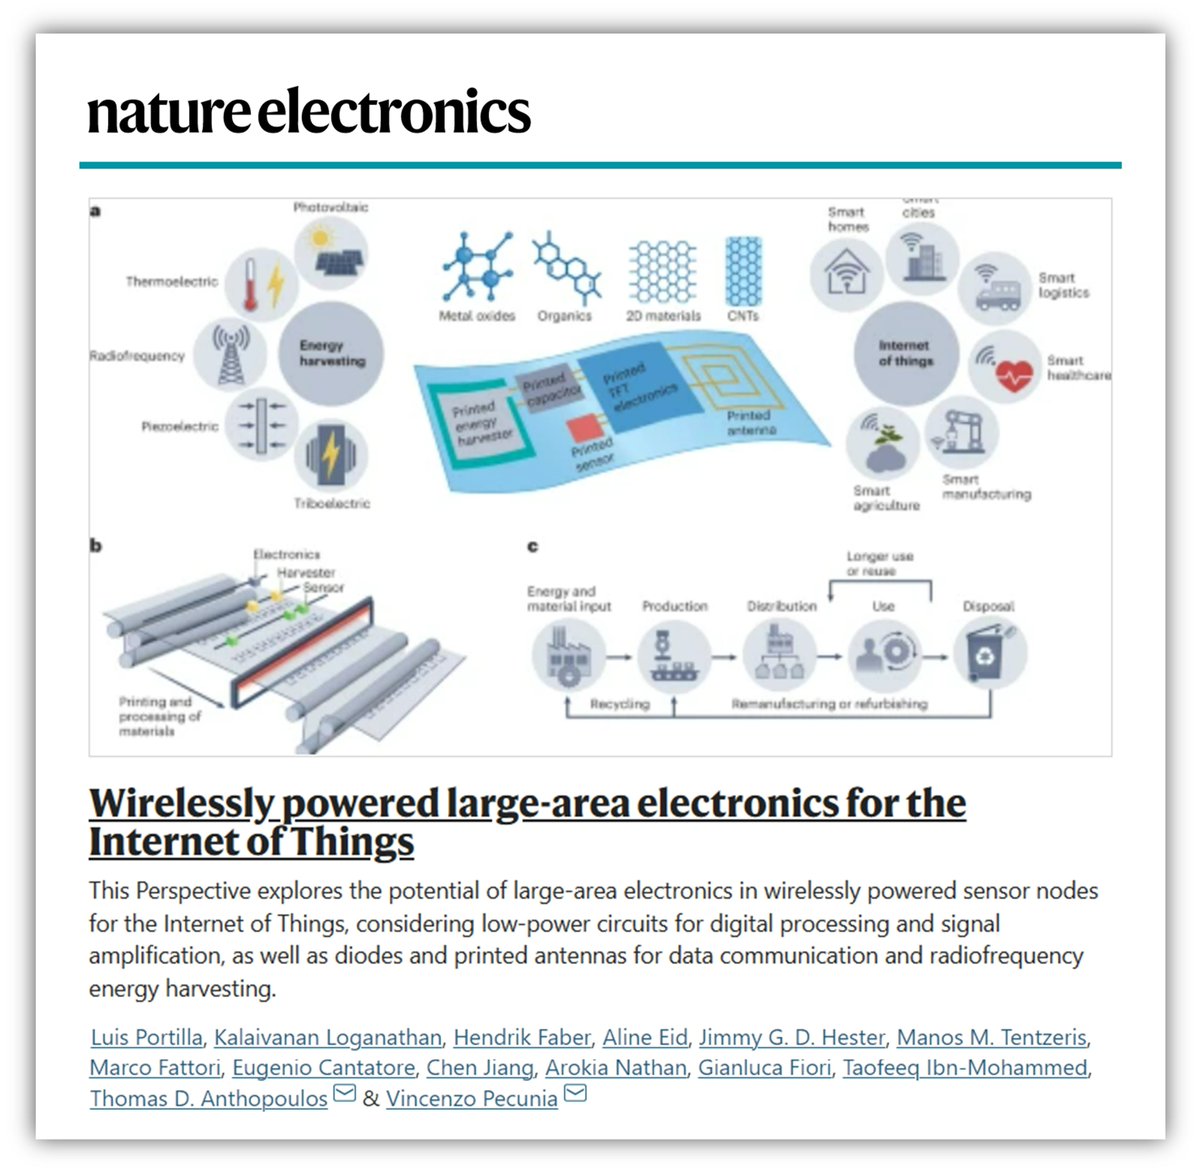 How can #printable #semiconductors enable a #sustainable Internet of Things? 
Read our latest paper @NatureElectron:▶️rdcu.be/c2pf6 

#IoT #OrganicSemiconductors #2DMaterials #MetalOxides #CarbonNanotubes #TFTs #EnergyHarvesting #Sustainability

doi.org/10.1038/s41928…